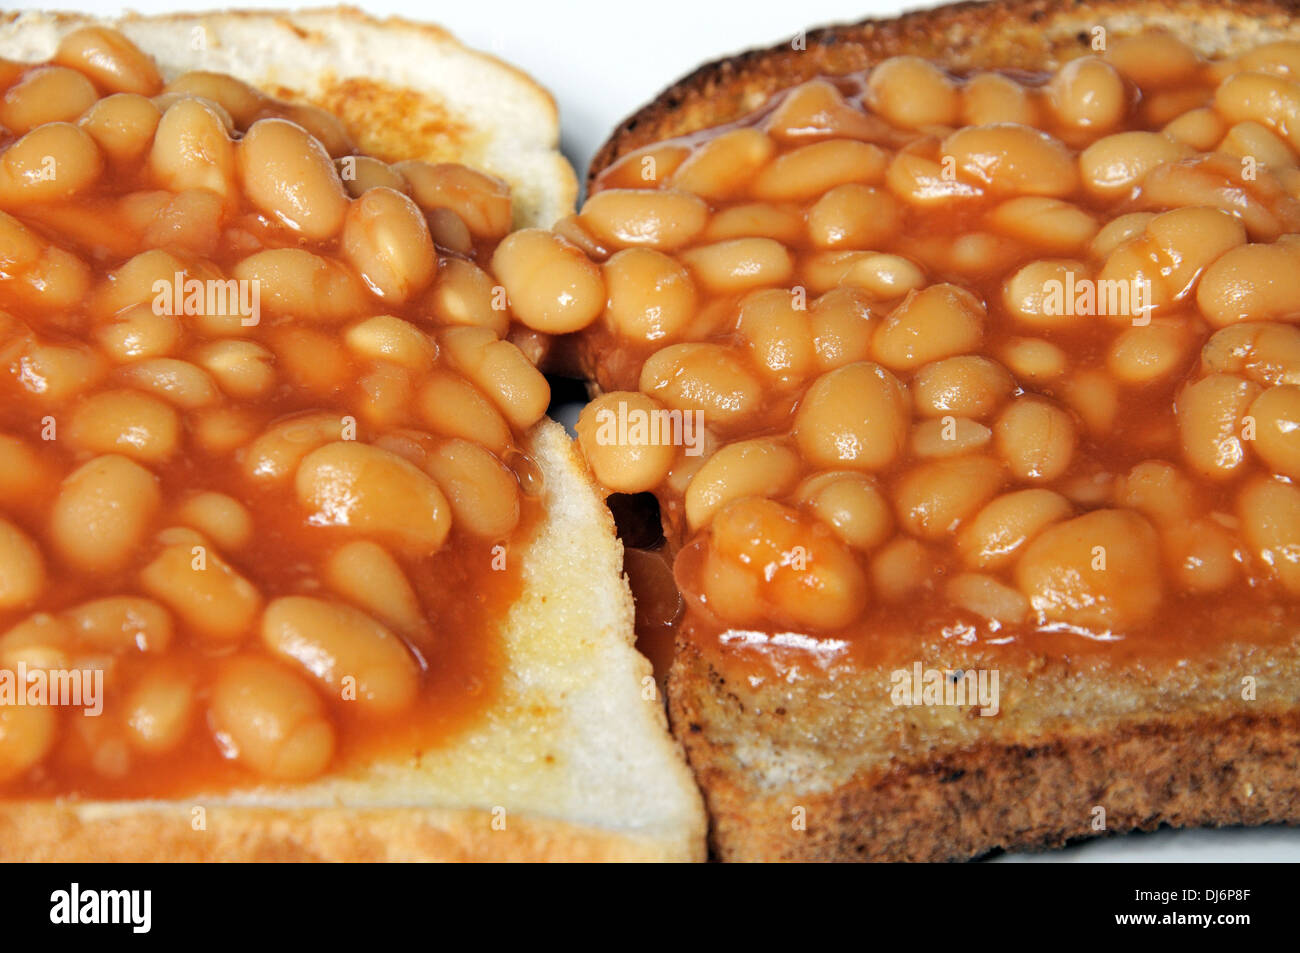 Two rounds of baked beans on toast. Stock Photo